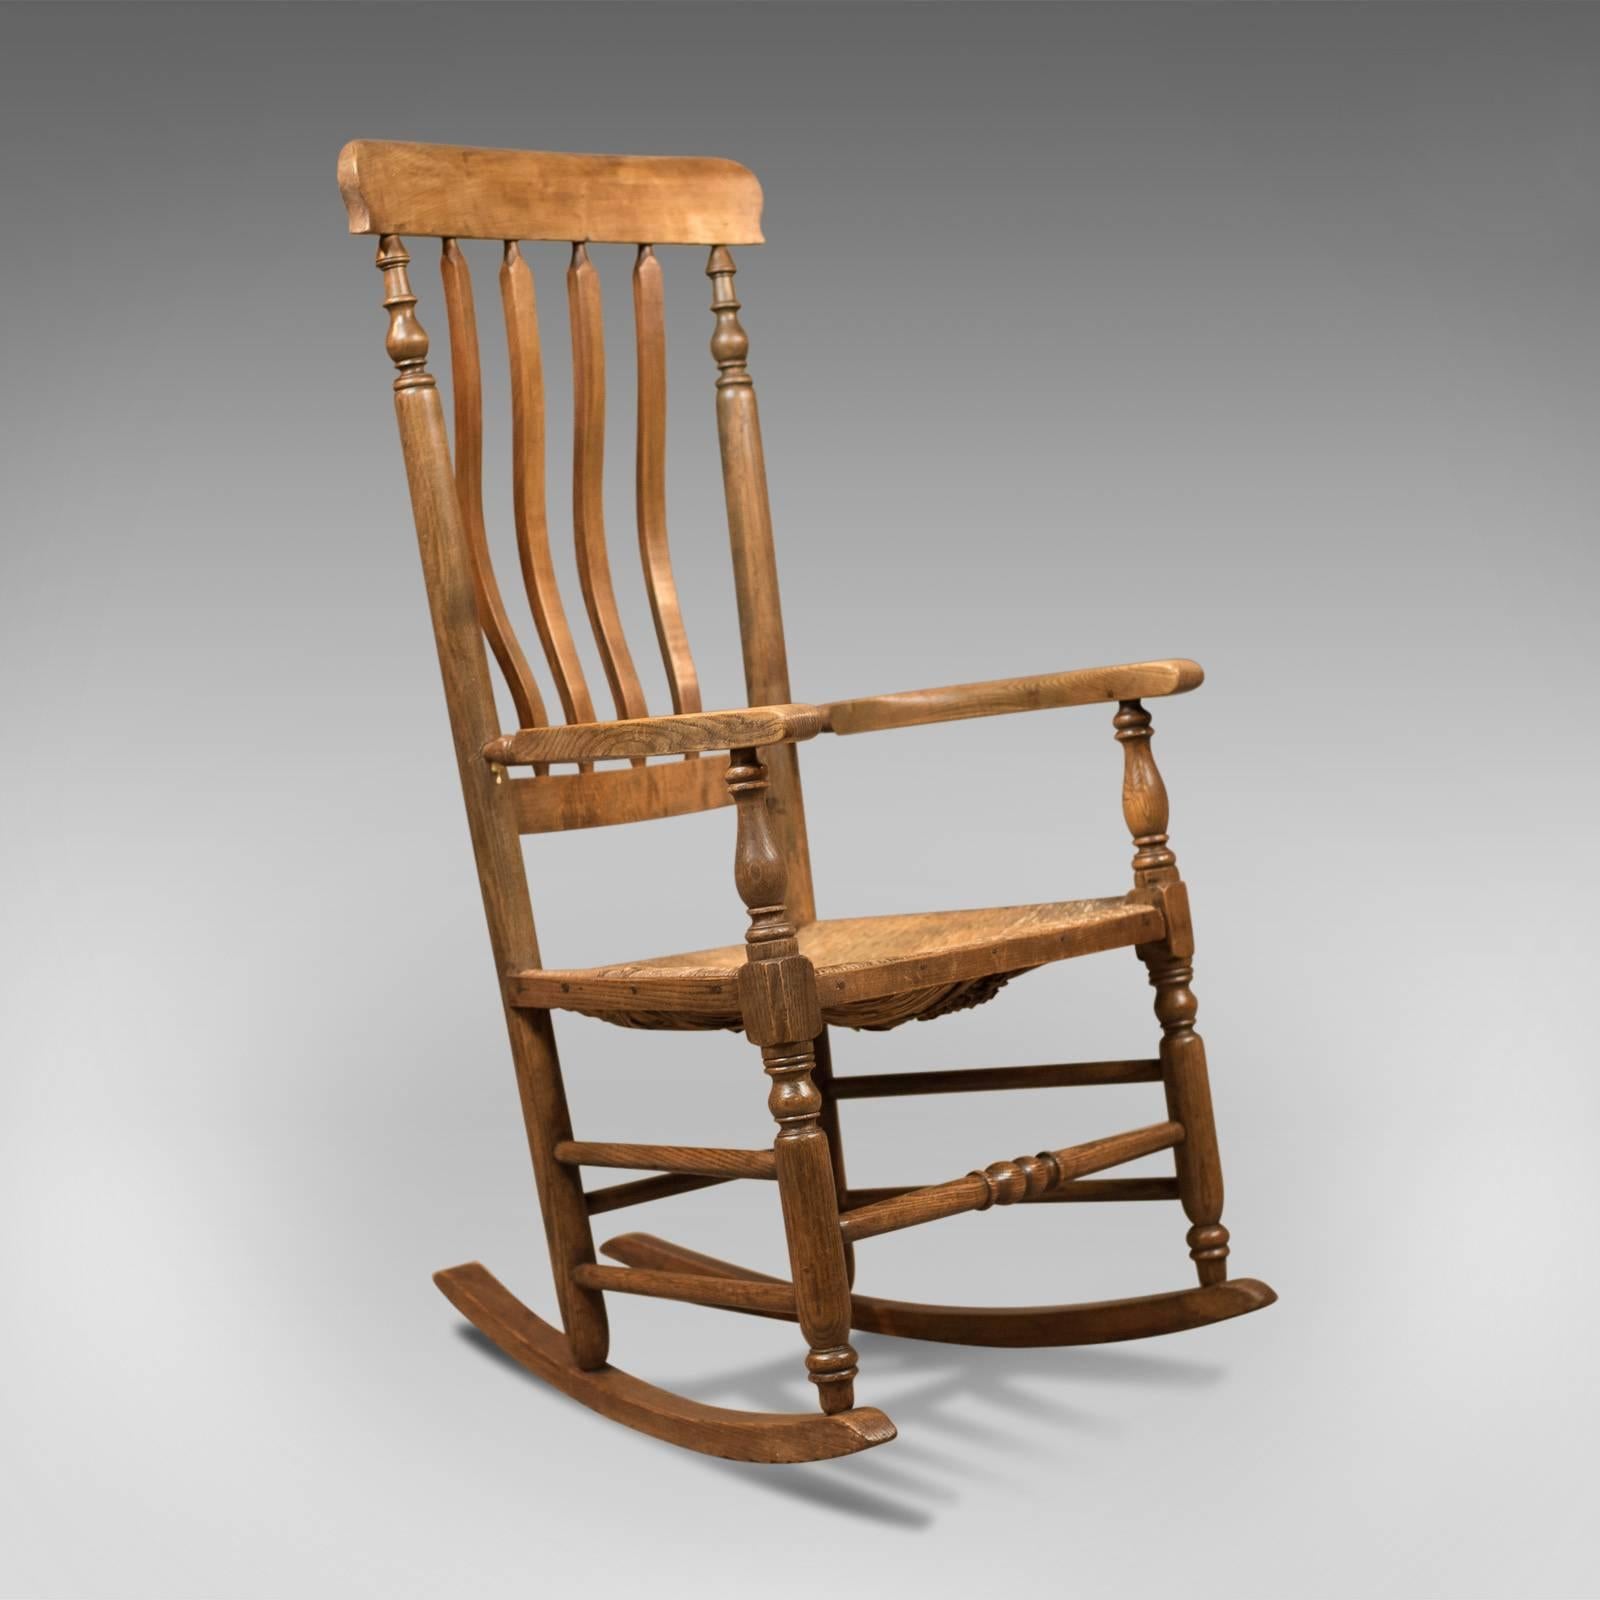 This is a delightful, country, antique rocking chair dating to the late Georgian period, circa 1800.

Beautifully crafted in English oak and ash
Good graining and a desirable aged patina
Strength from the box stretcher decorated with a simple